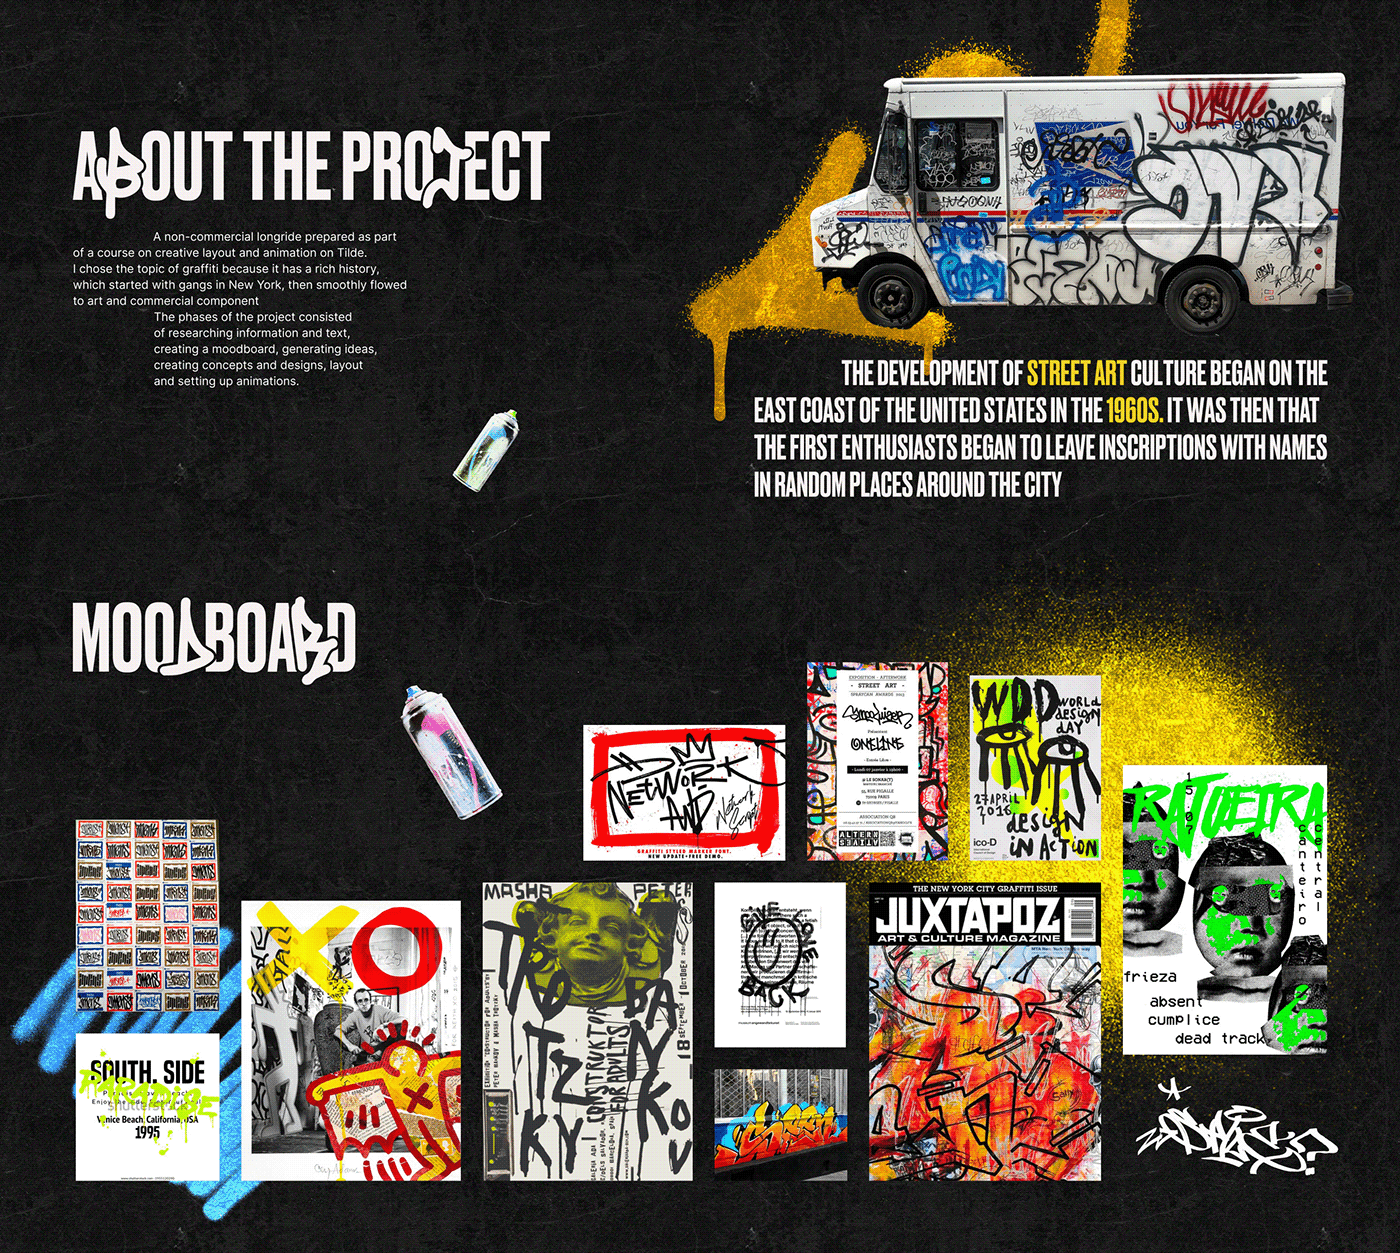 About project and moodboard